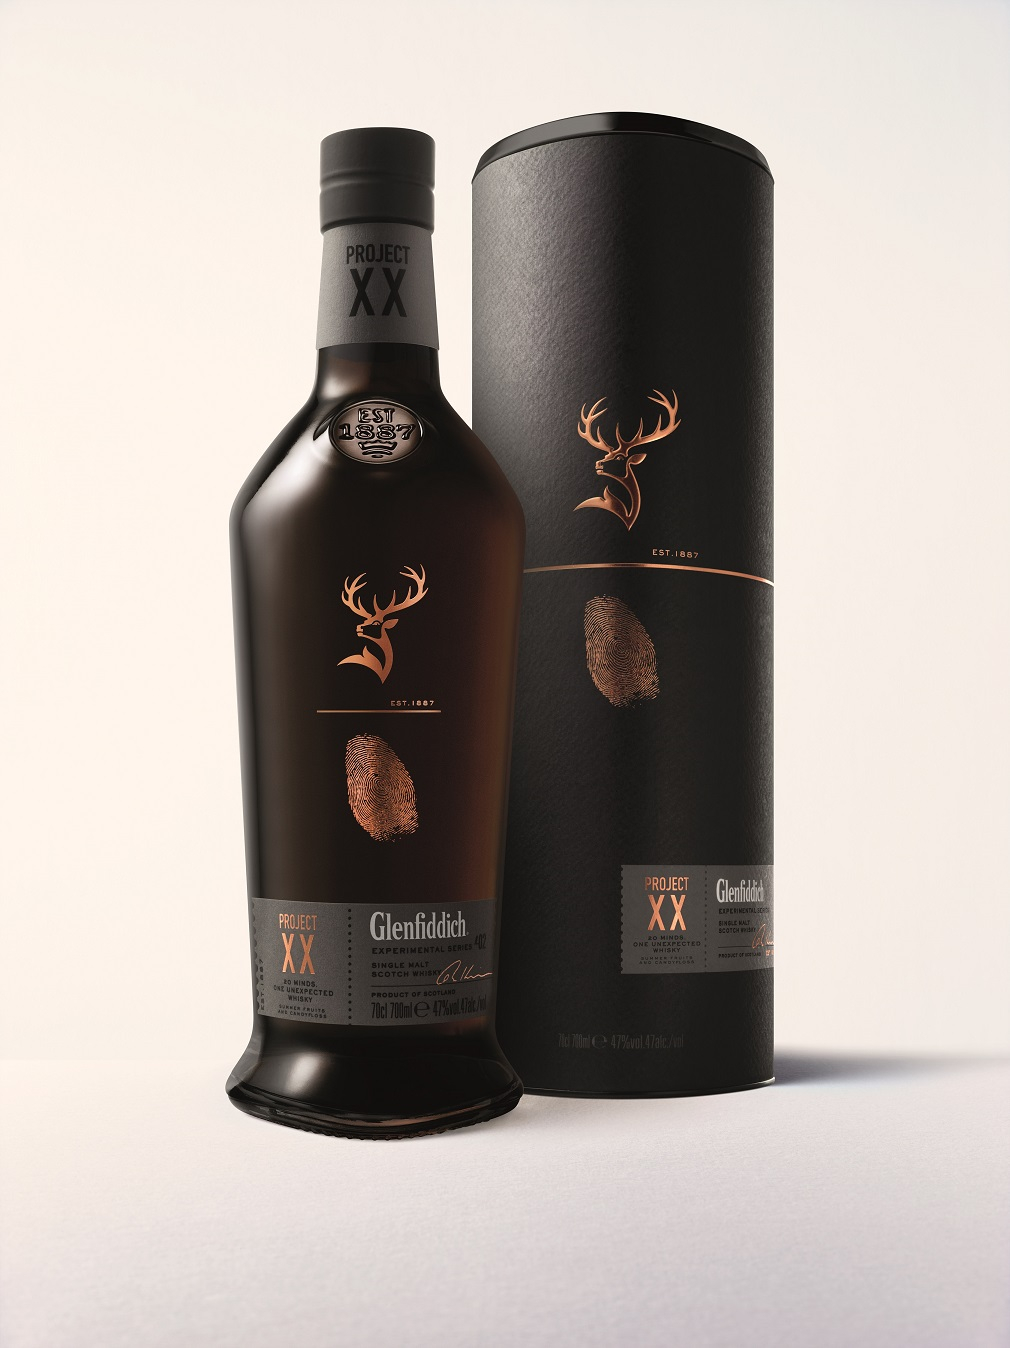 Glenfiddich Project XX Whisky